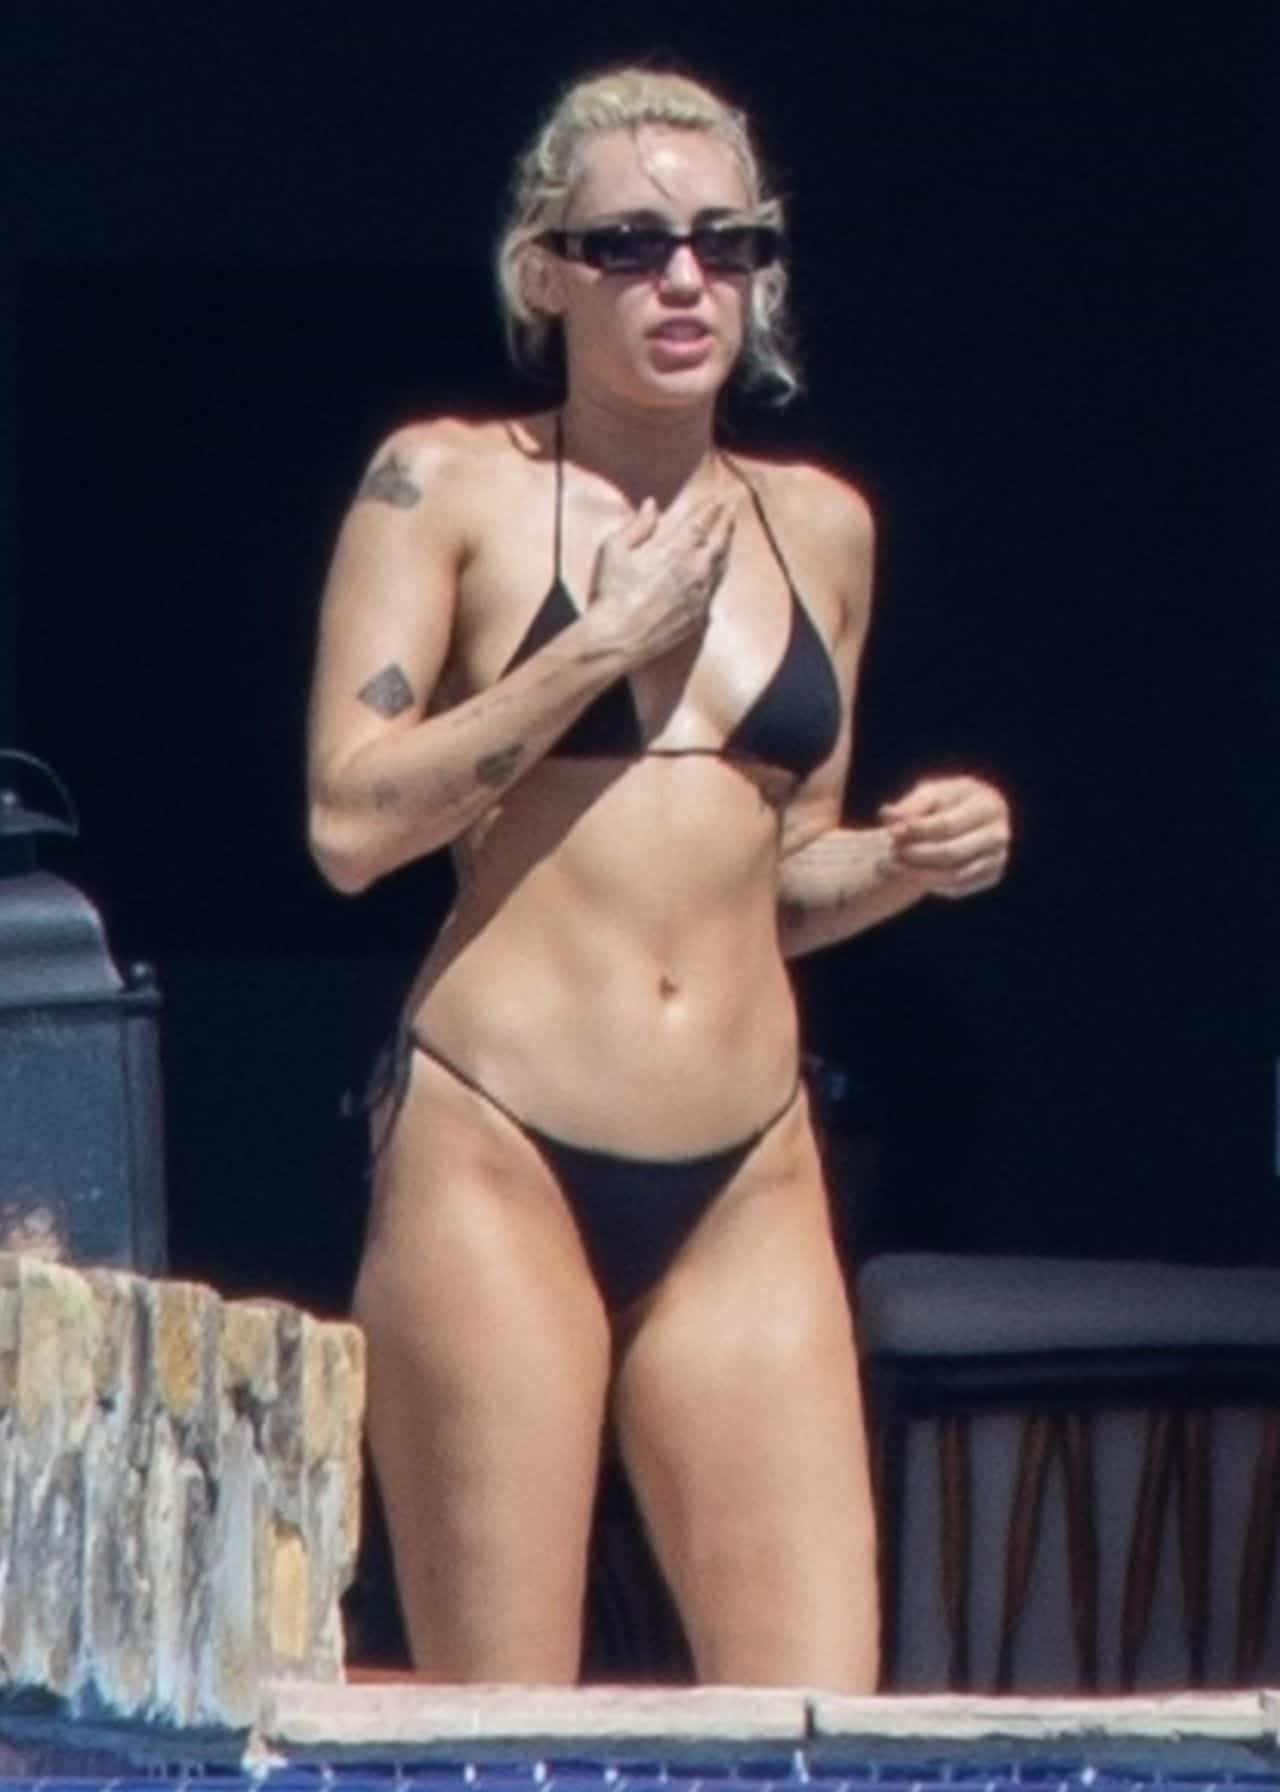 Miley Cyrus Turns Up the Heat in a Tiny Black Bikini by the Pool in Mexico